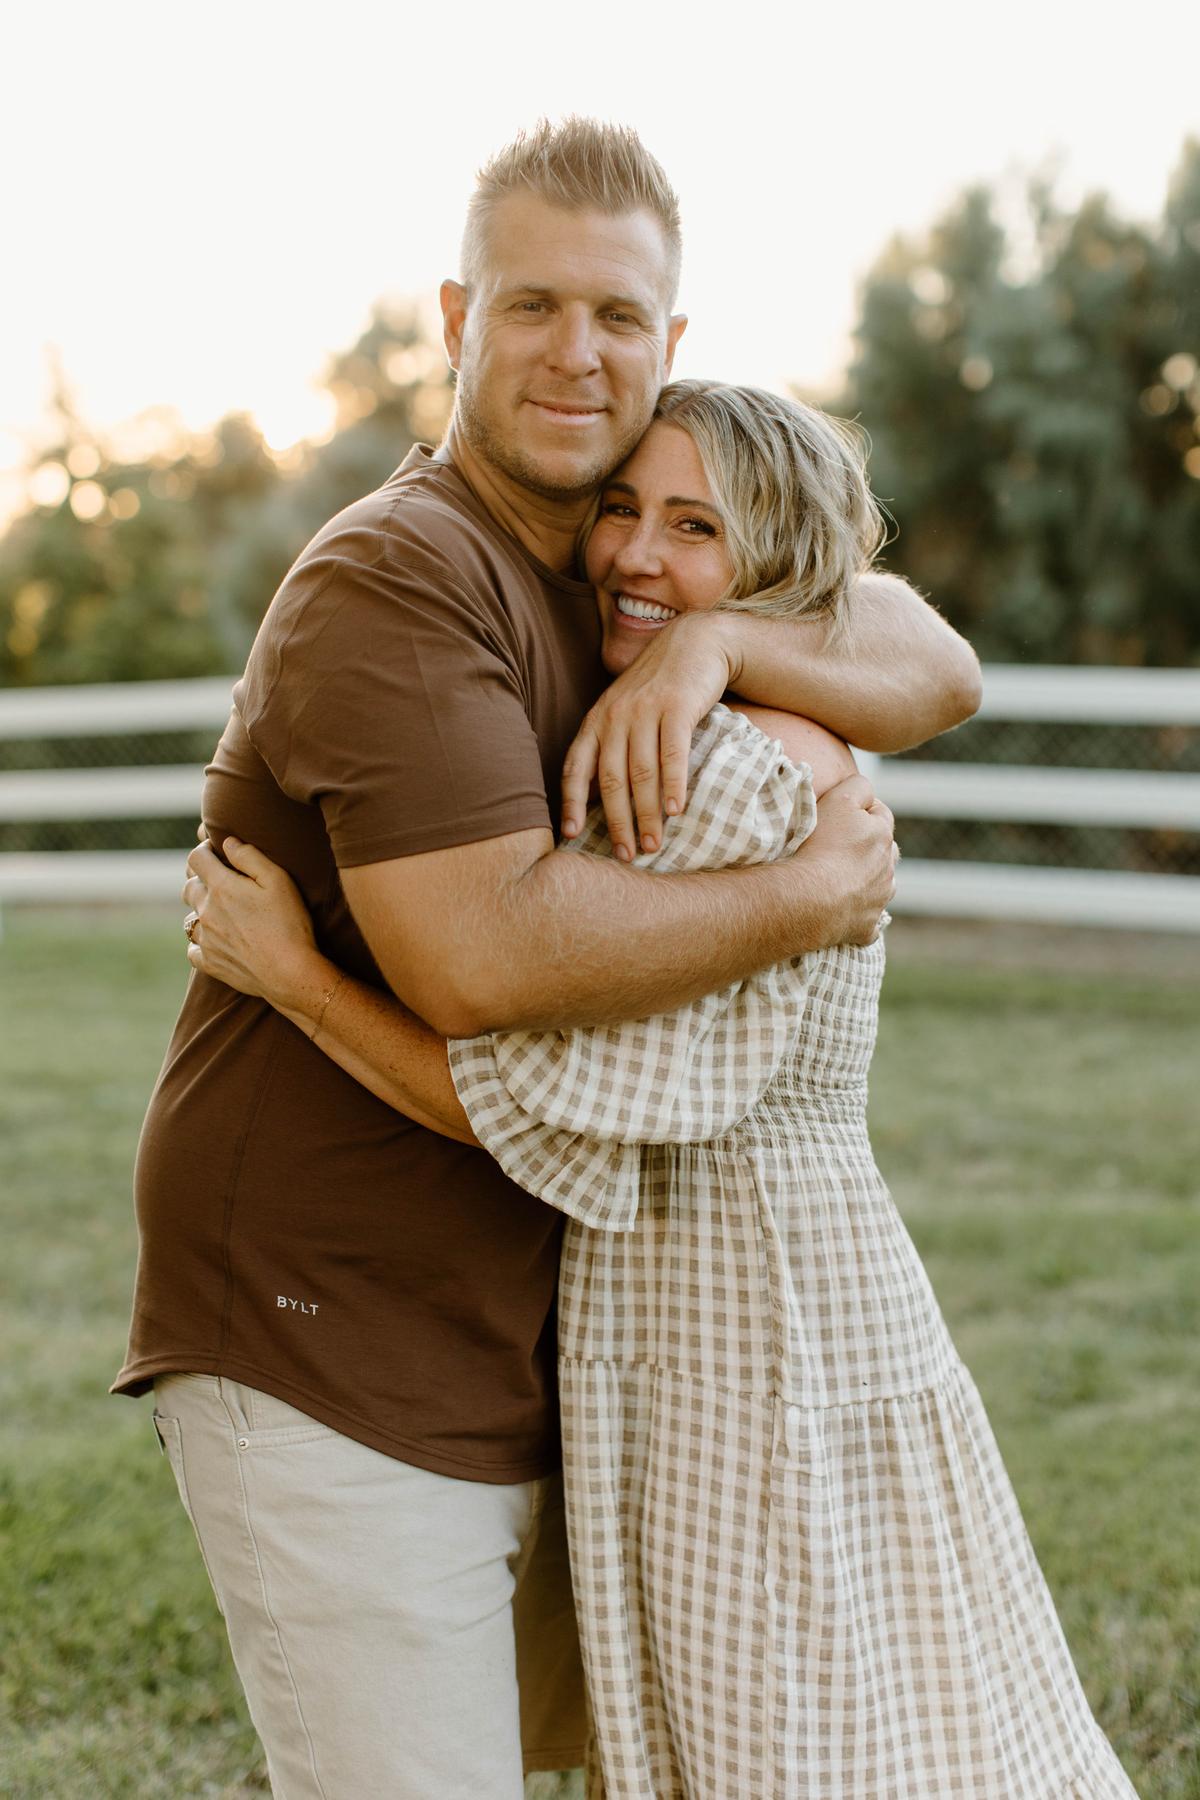  Brooklyn Powell with her husband, Jonathan Powell. She says faith has played a huge role in how they parent and believes everyone is "in need of grace," including children because no one is perfect. (Courtesy of <a href="https://www.instagram.com/thepastelfox/">Brooklyn Powell</a>)